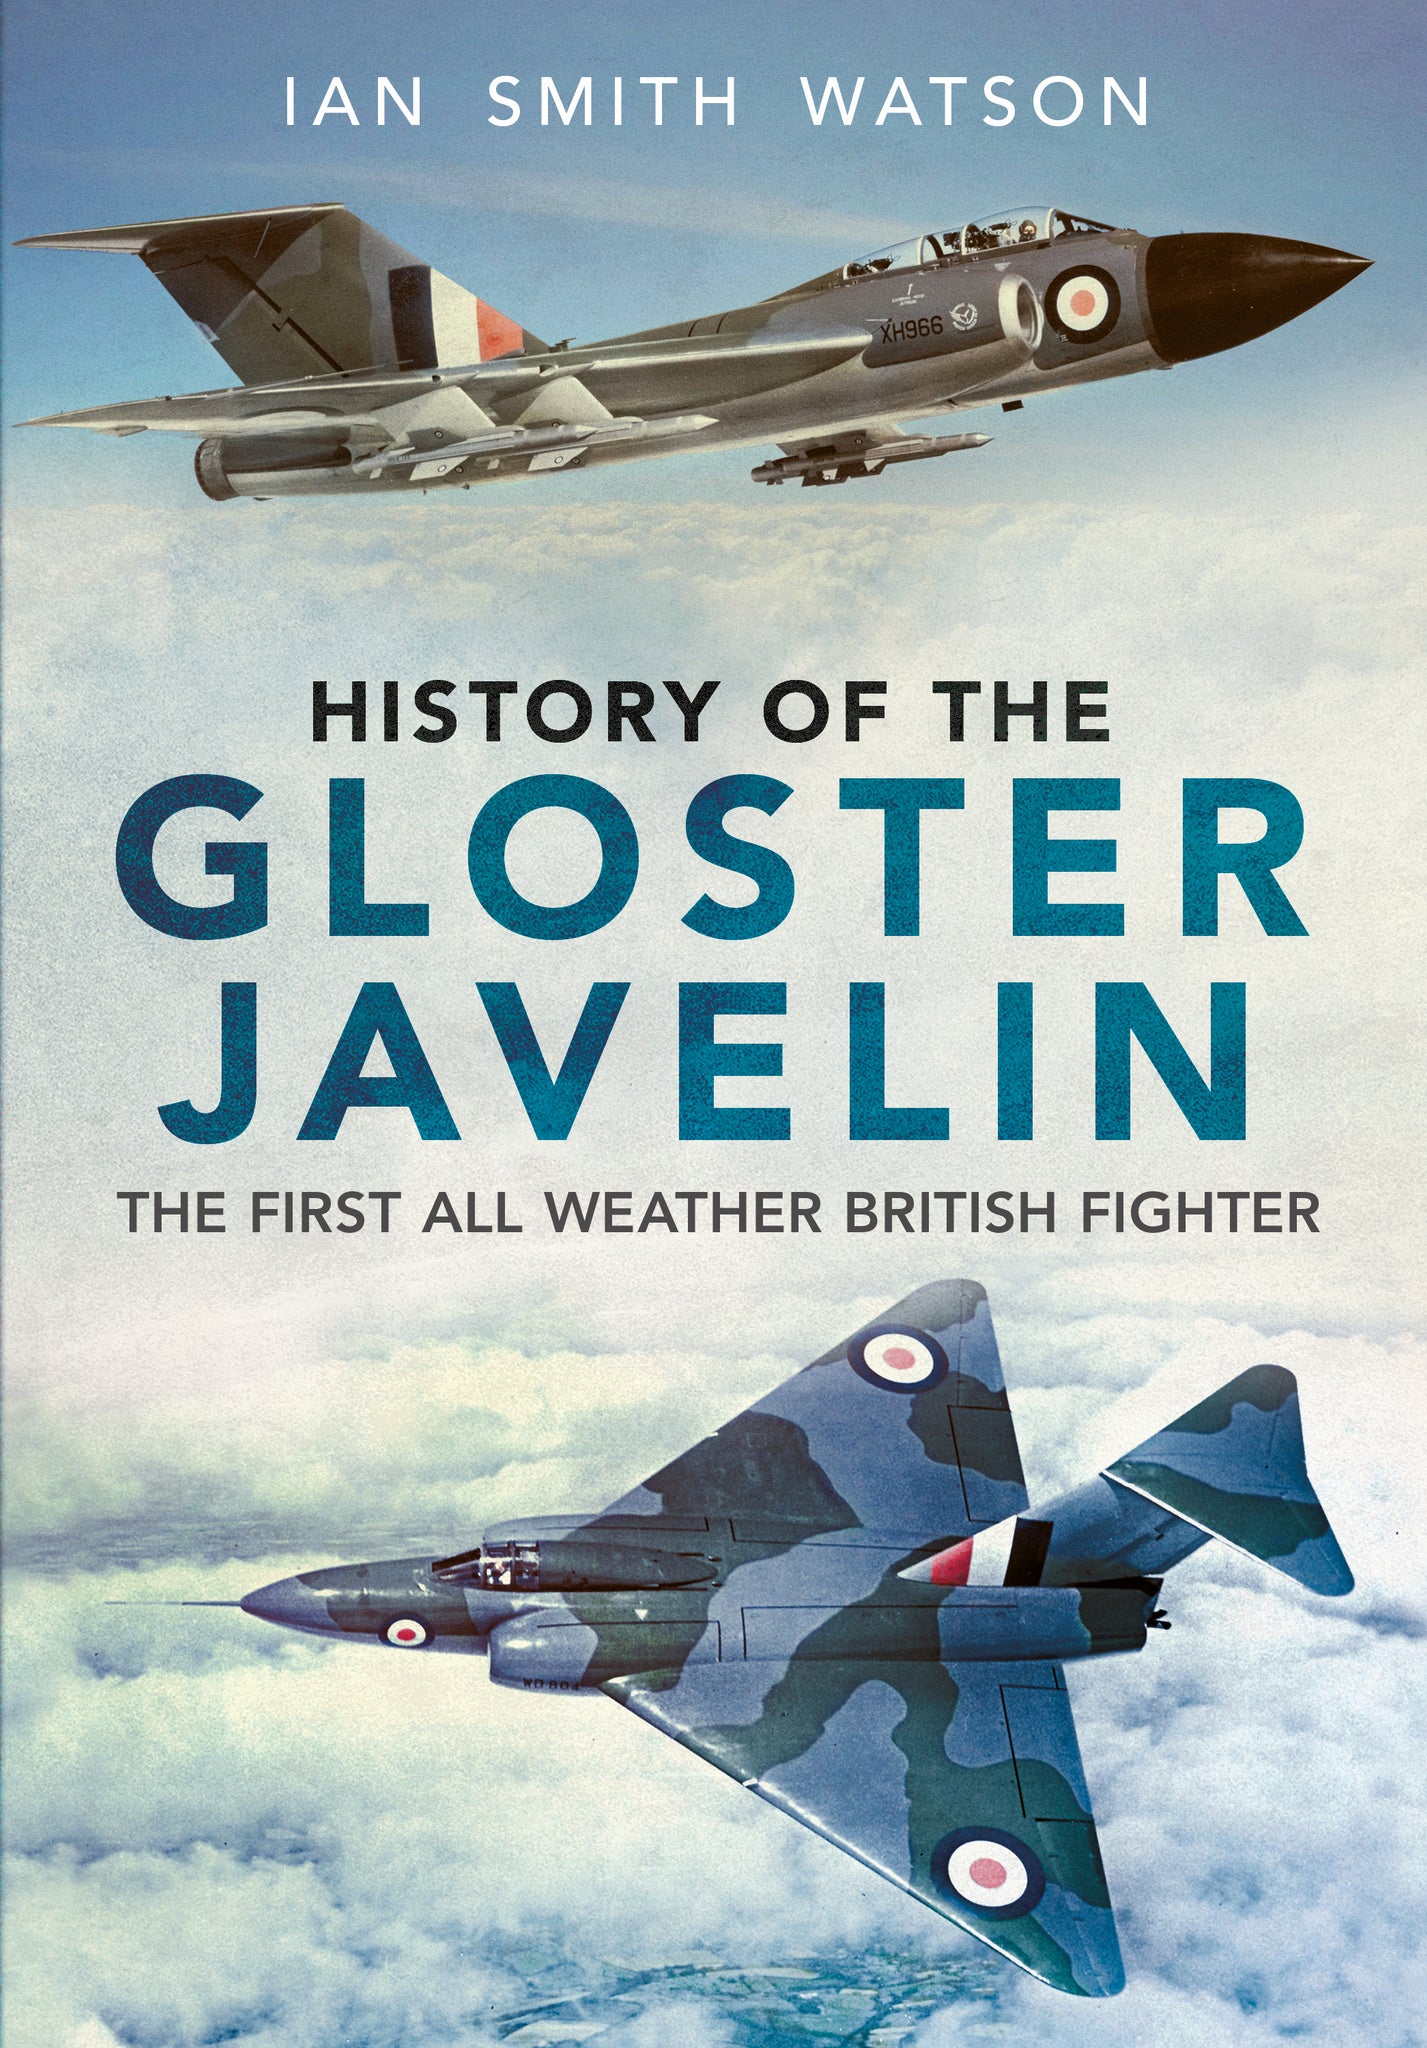 History of the Gloster Javelin - available now from Fonthill Media